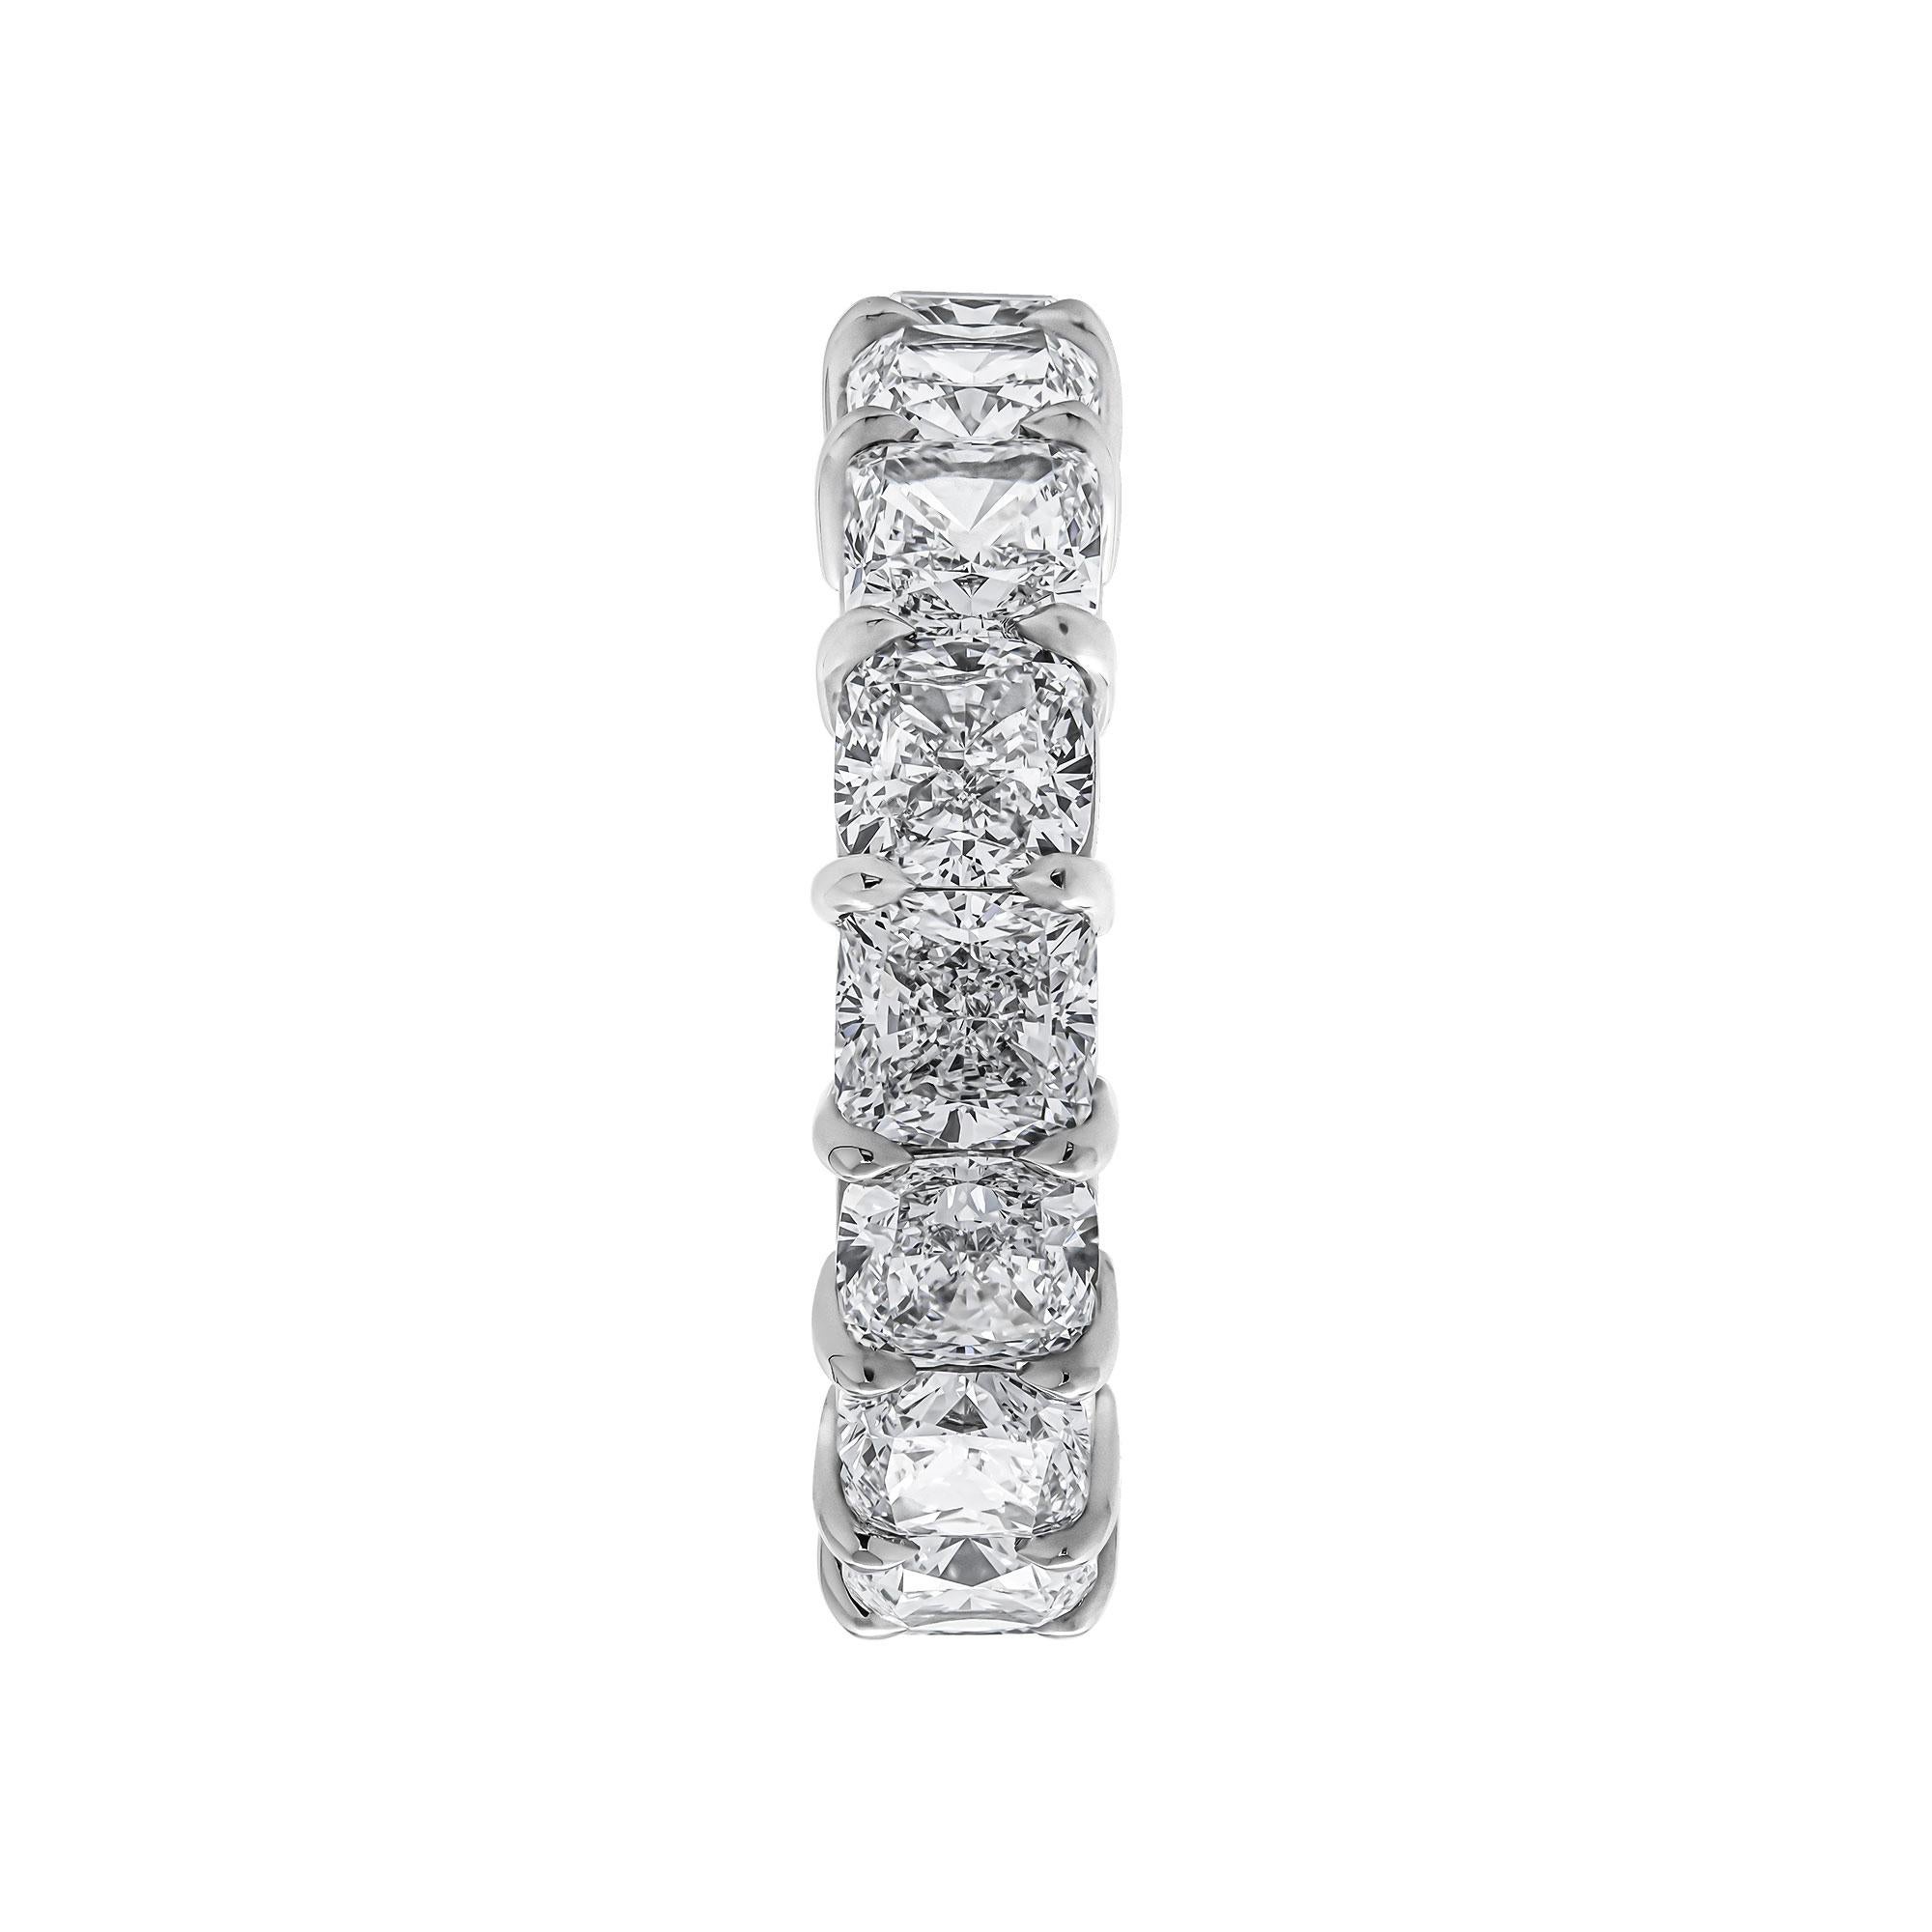 Eternity band with 8.59 Carat Cushion Cut Diamonds
Mounted in Platinum 950, 16 Cushion cut diamonds won't miss a sparkle!
Beautiful cut, bold and classy
Each stone is 0.5ct - delivers a large high end look!
All stone are estimated F-G color and VS